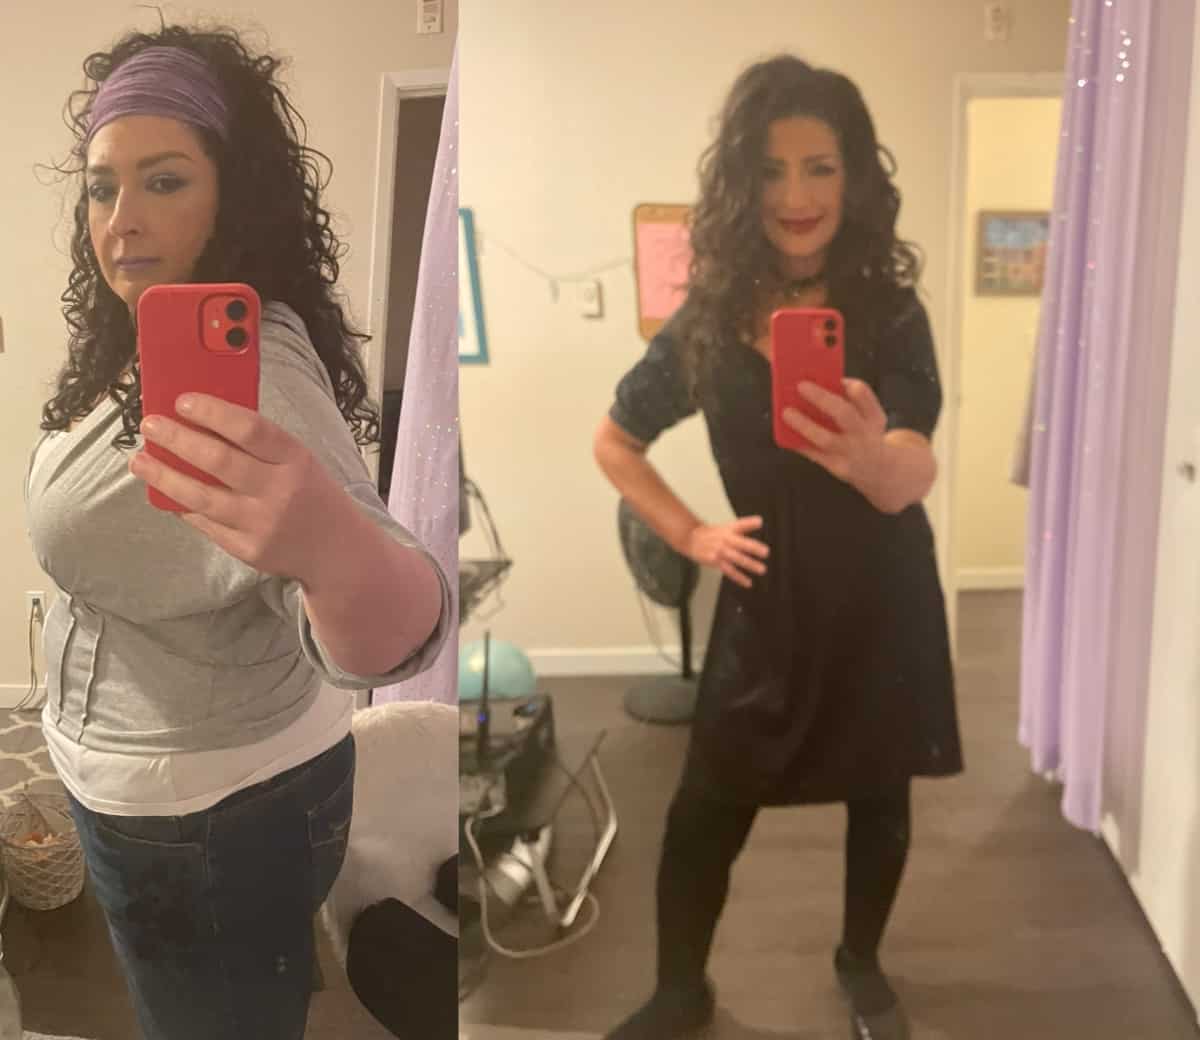 Lora L. before and after losing weight.